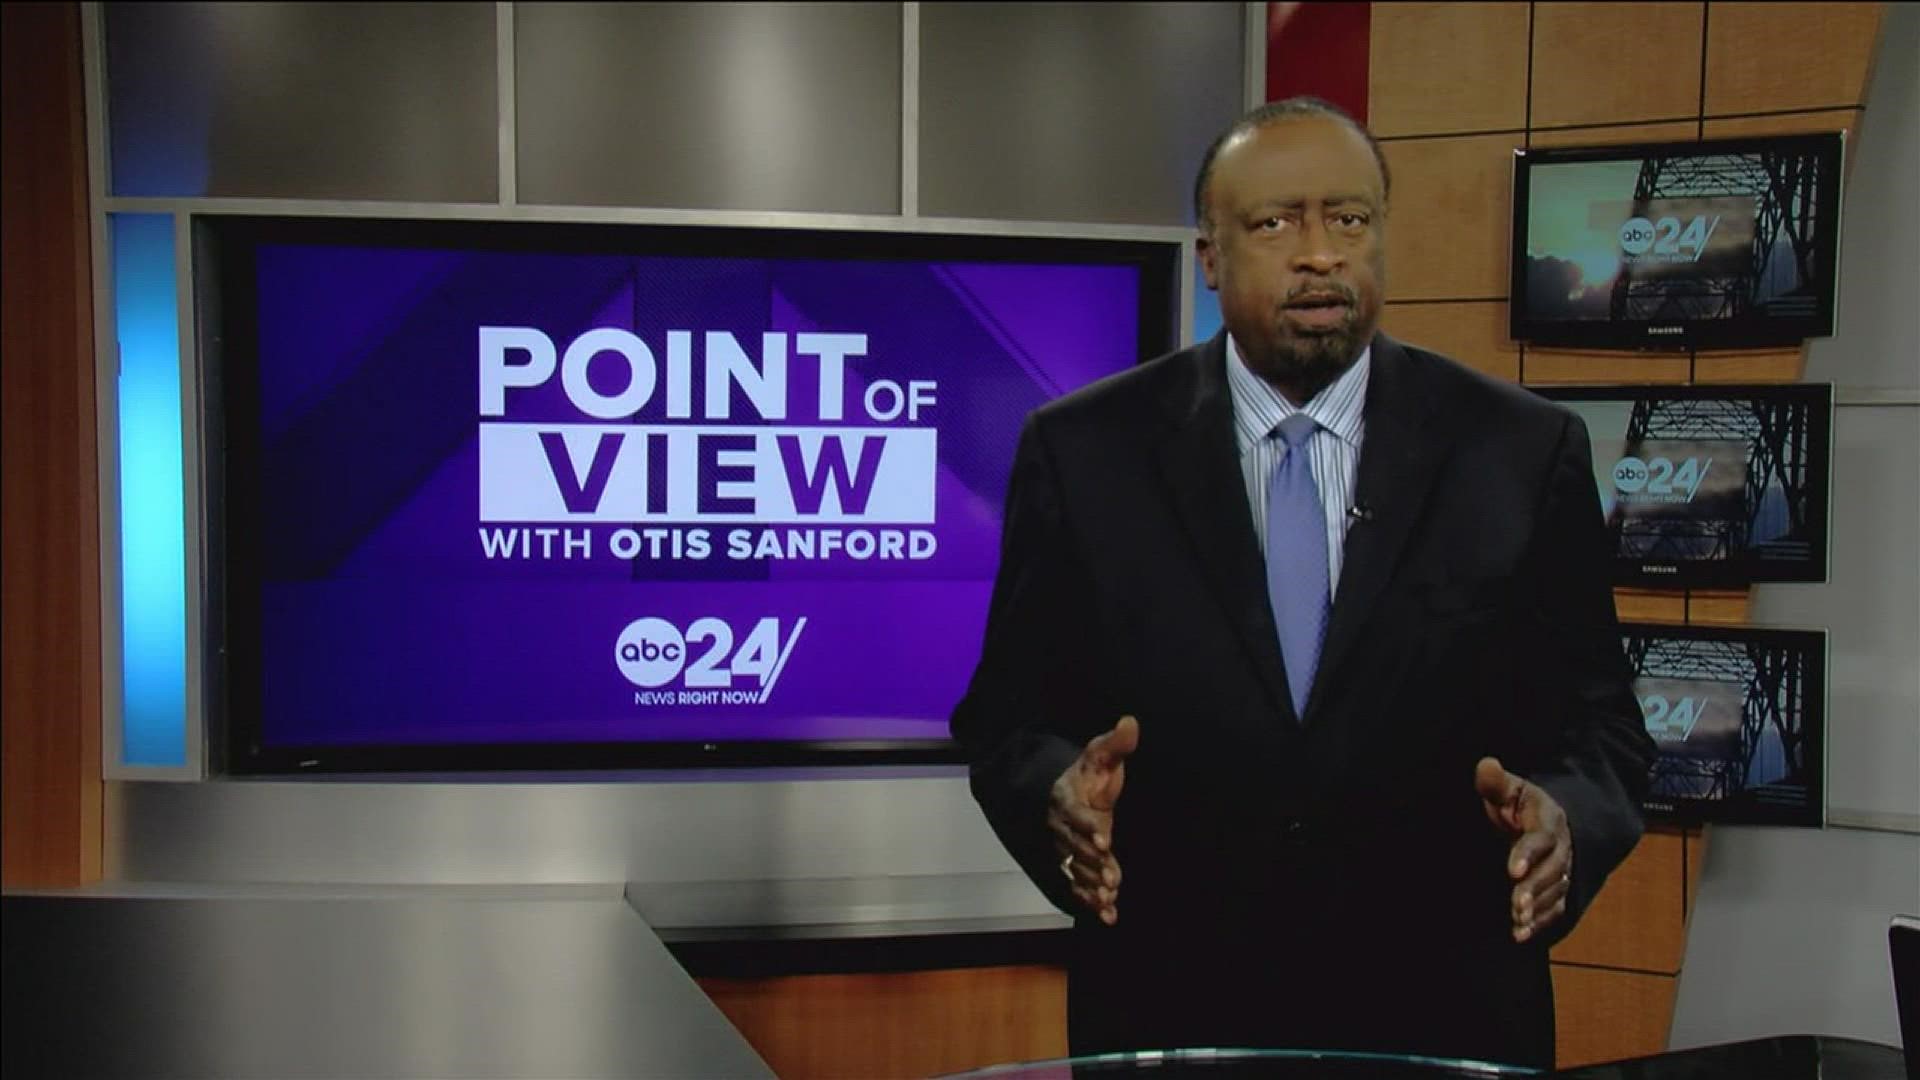 ABC 24 political analyst and commentator Otis Sanford shared his point of view on Memphis City Councilman Edmund Ford Sr.’s statement on outburst over pronouns.